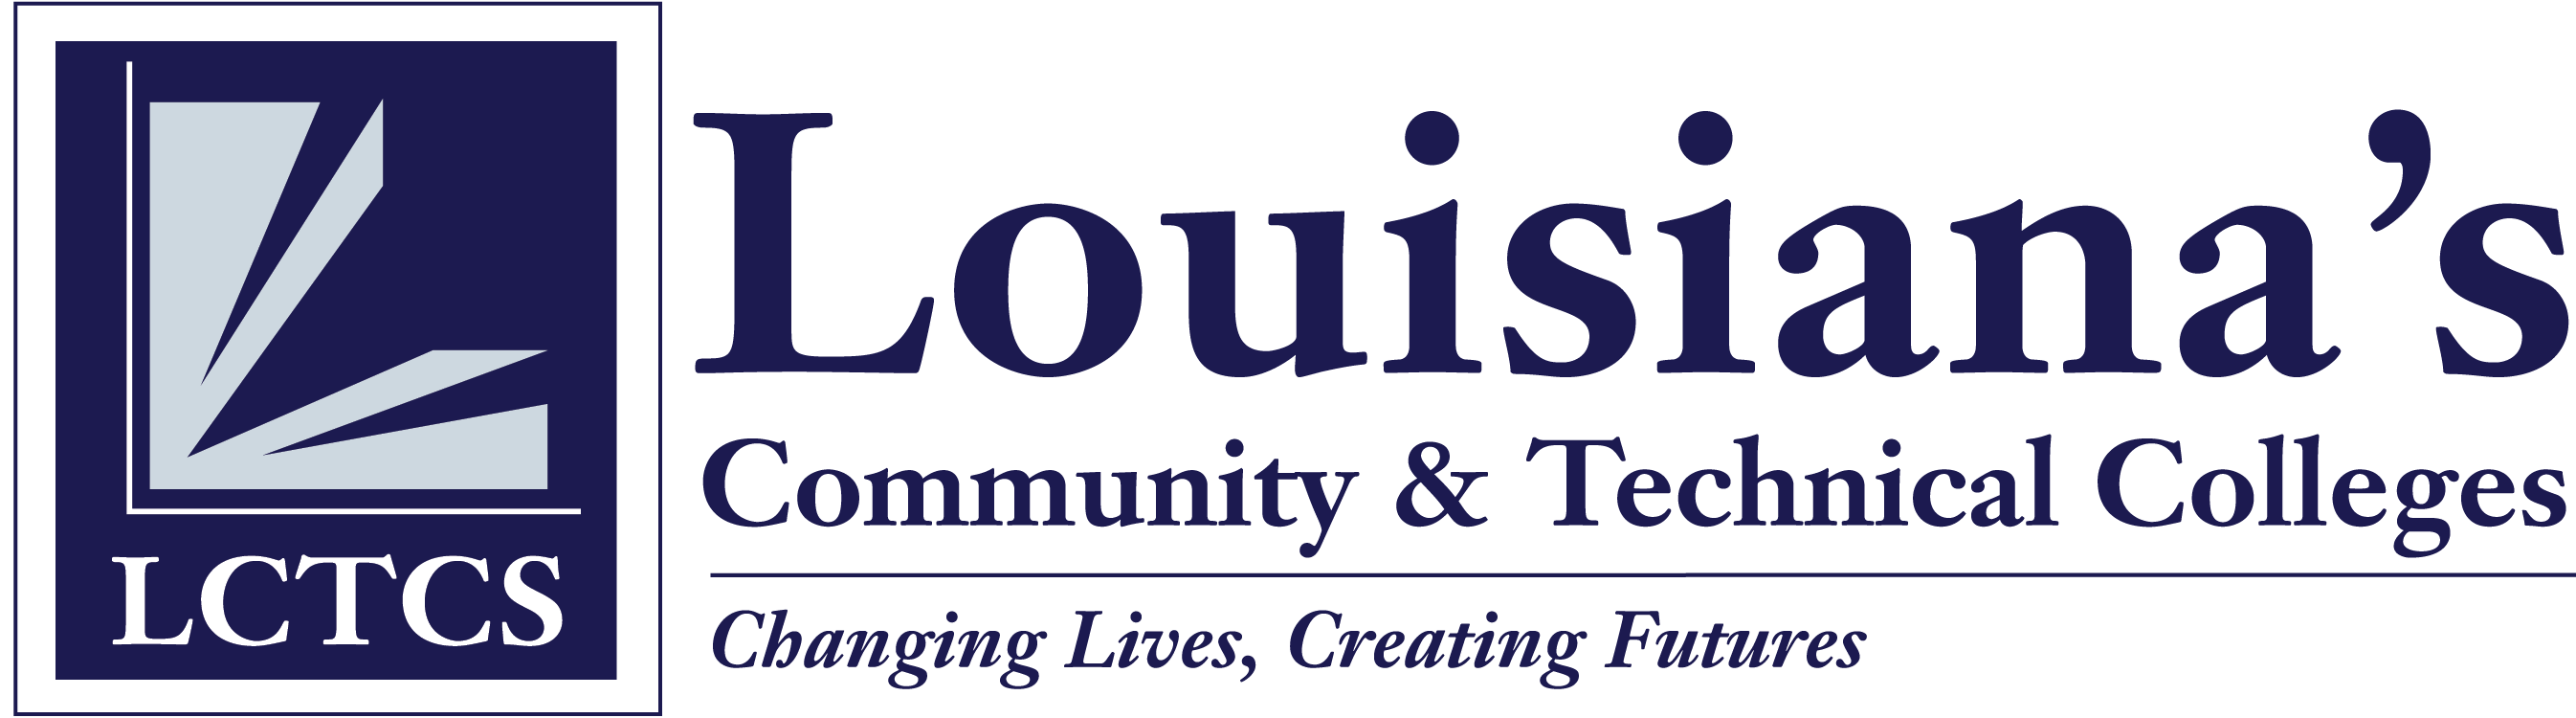 Lousiana’s Community & Technical Colleges02